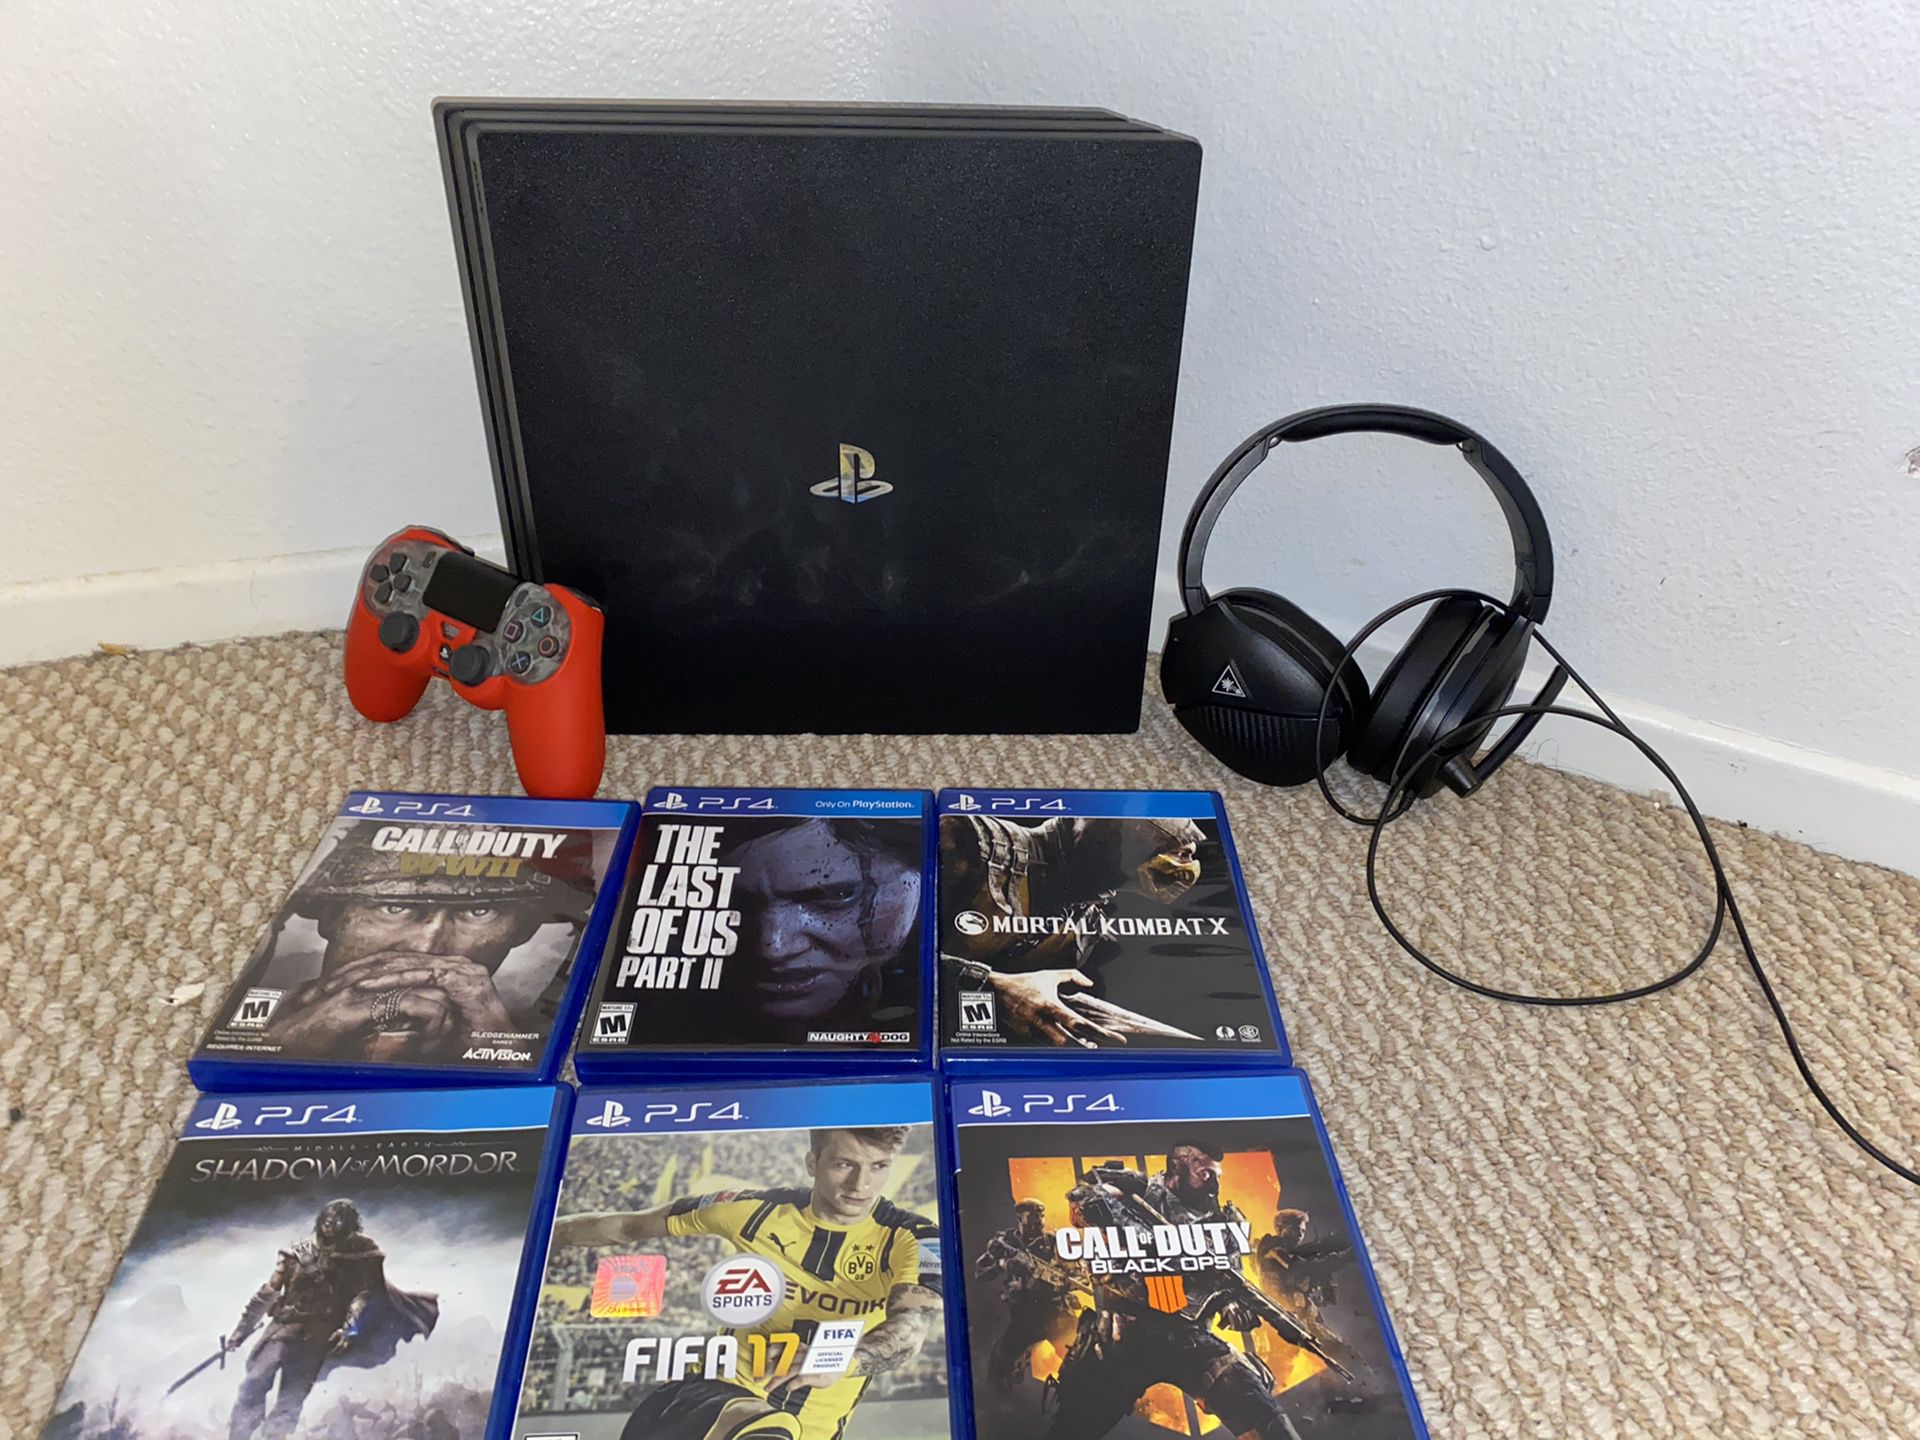 PS4 Pro 1TB, controller and headset